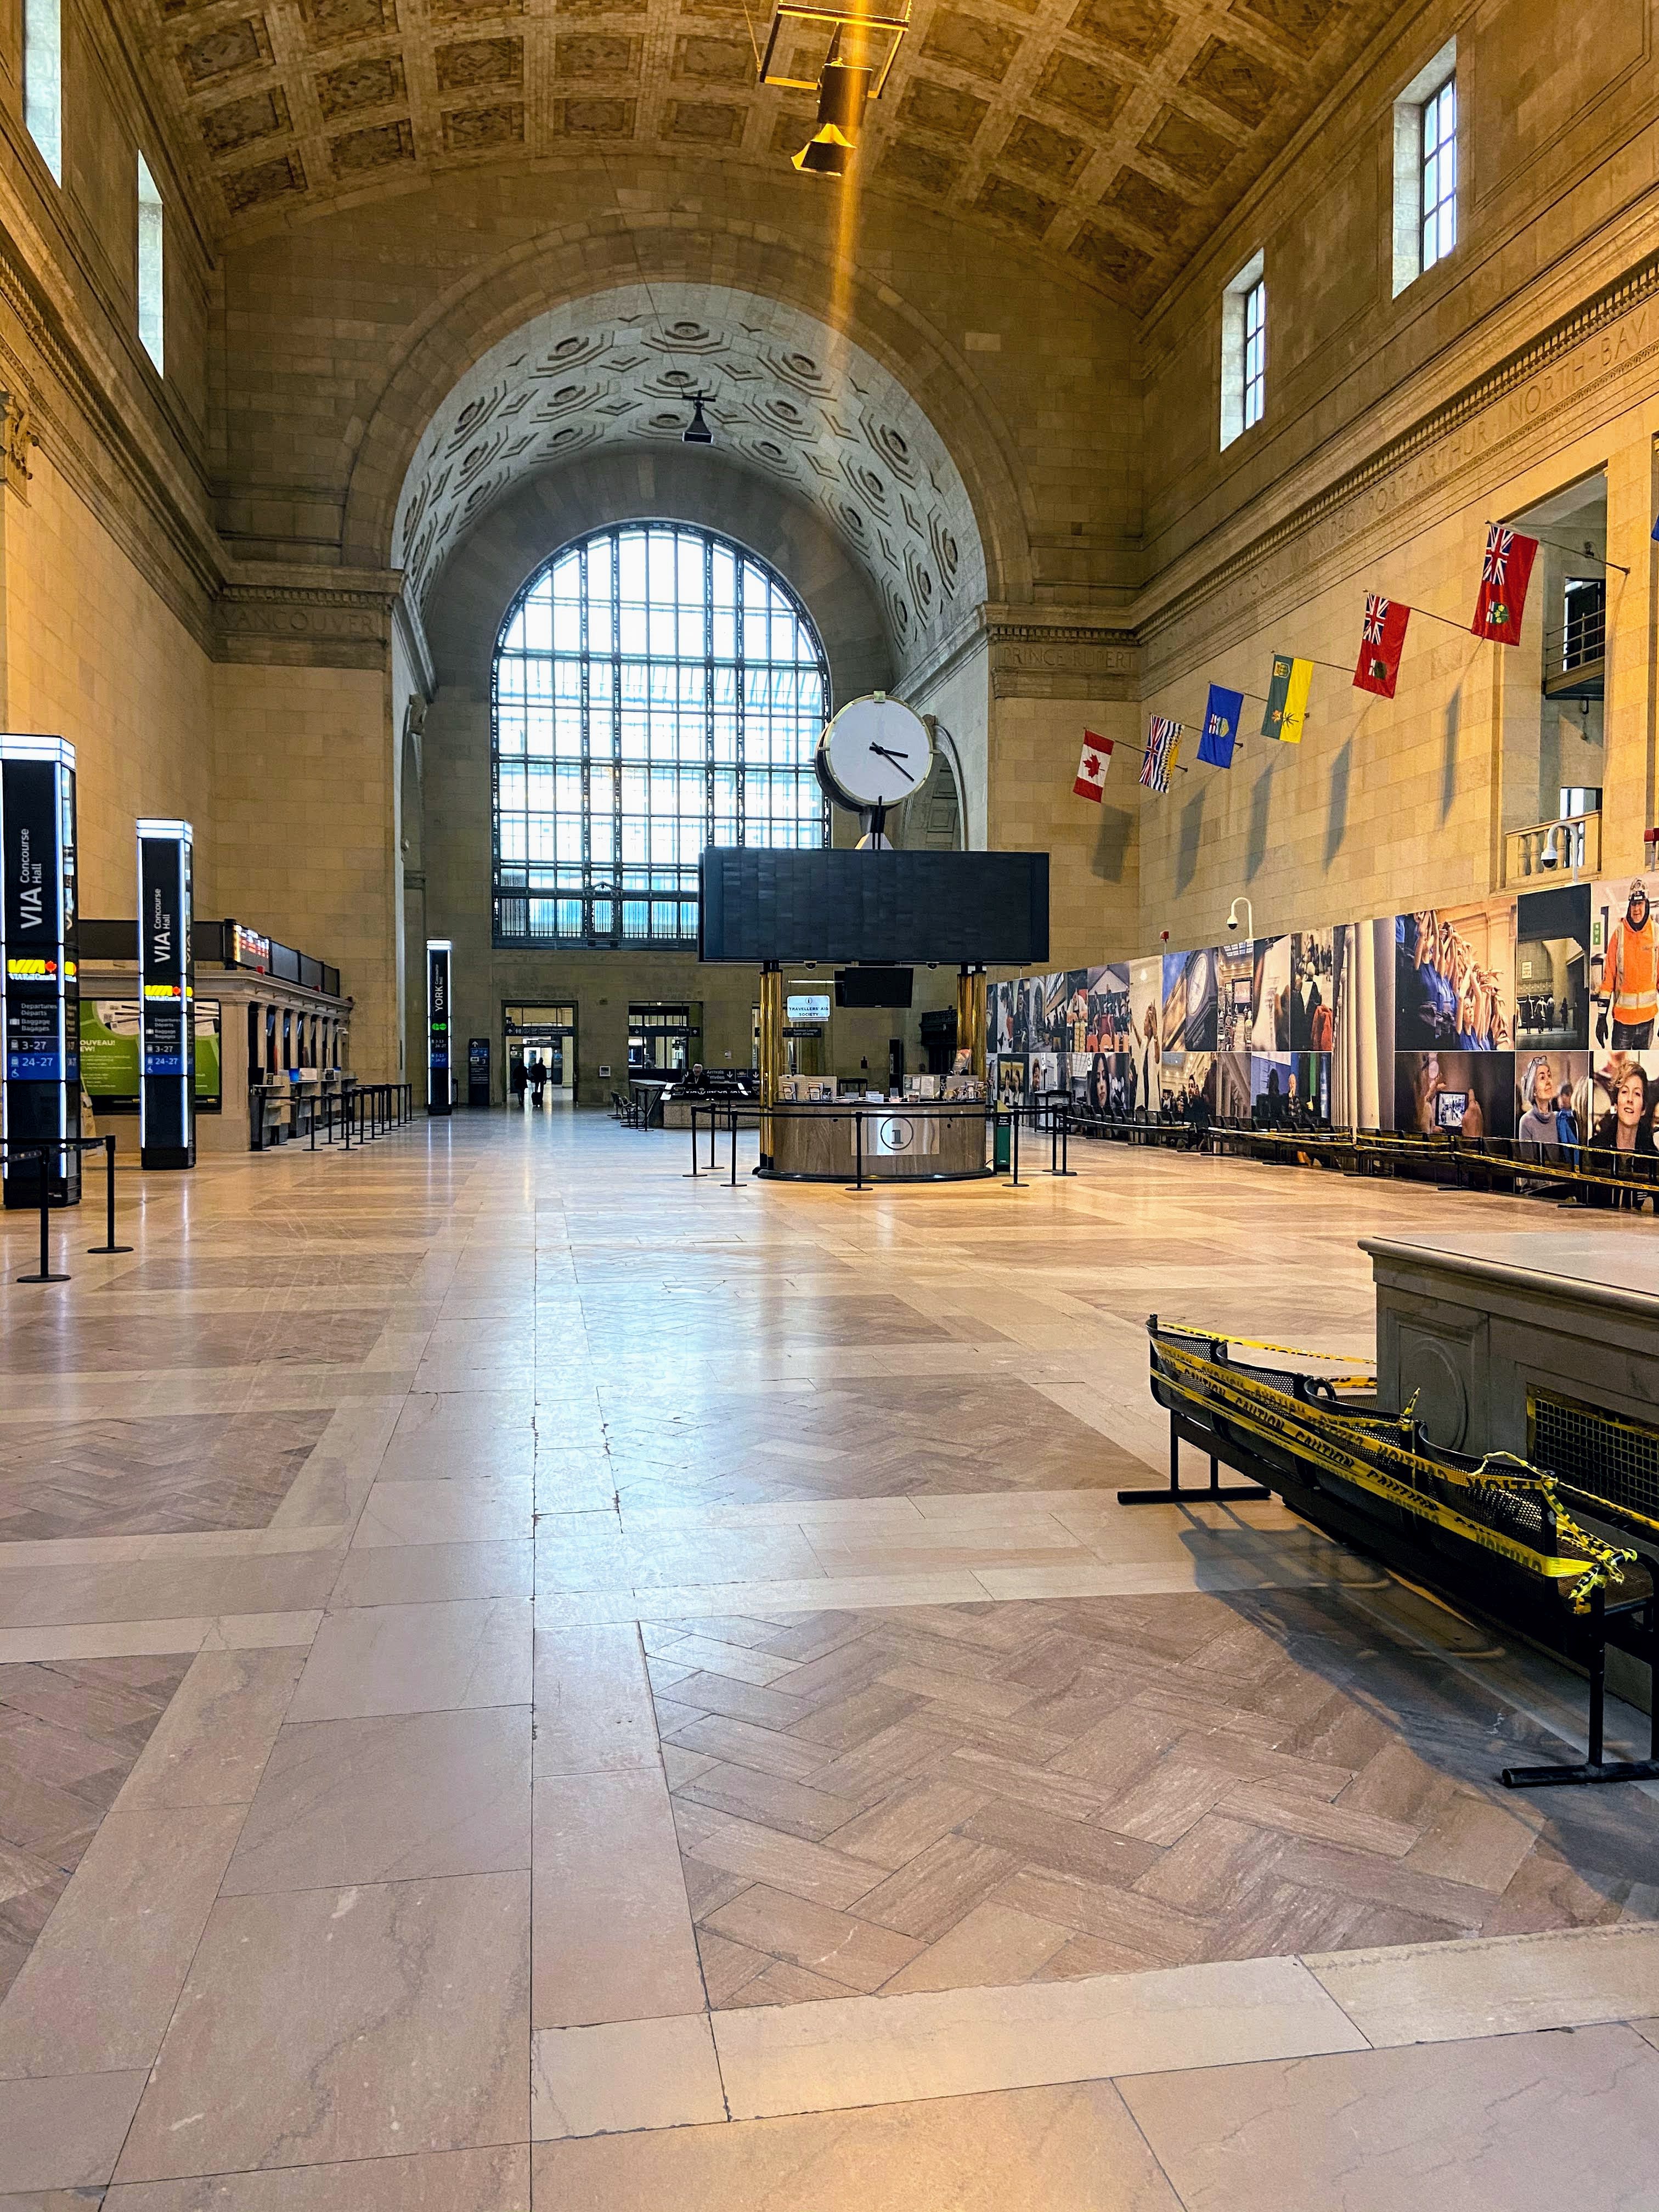 A look inside UNion Station, largely vacant.